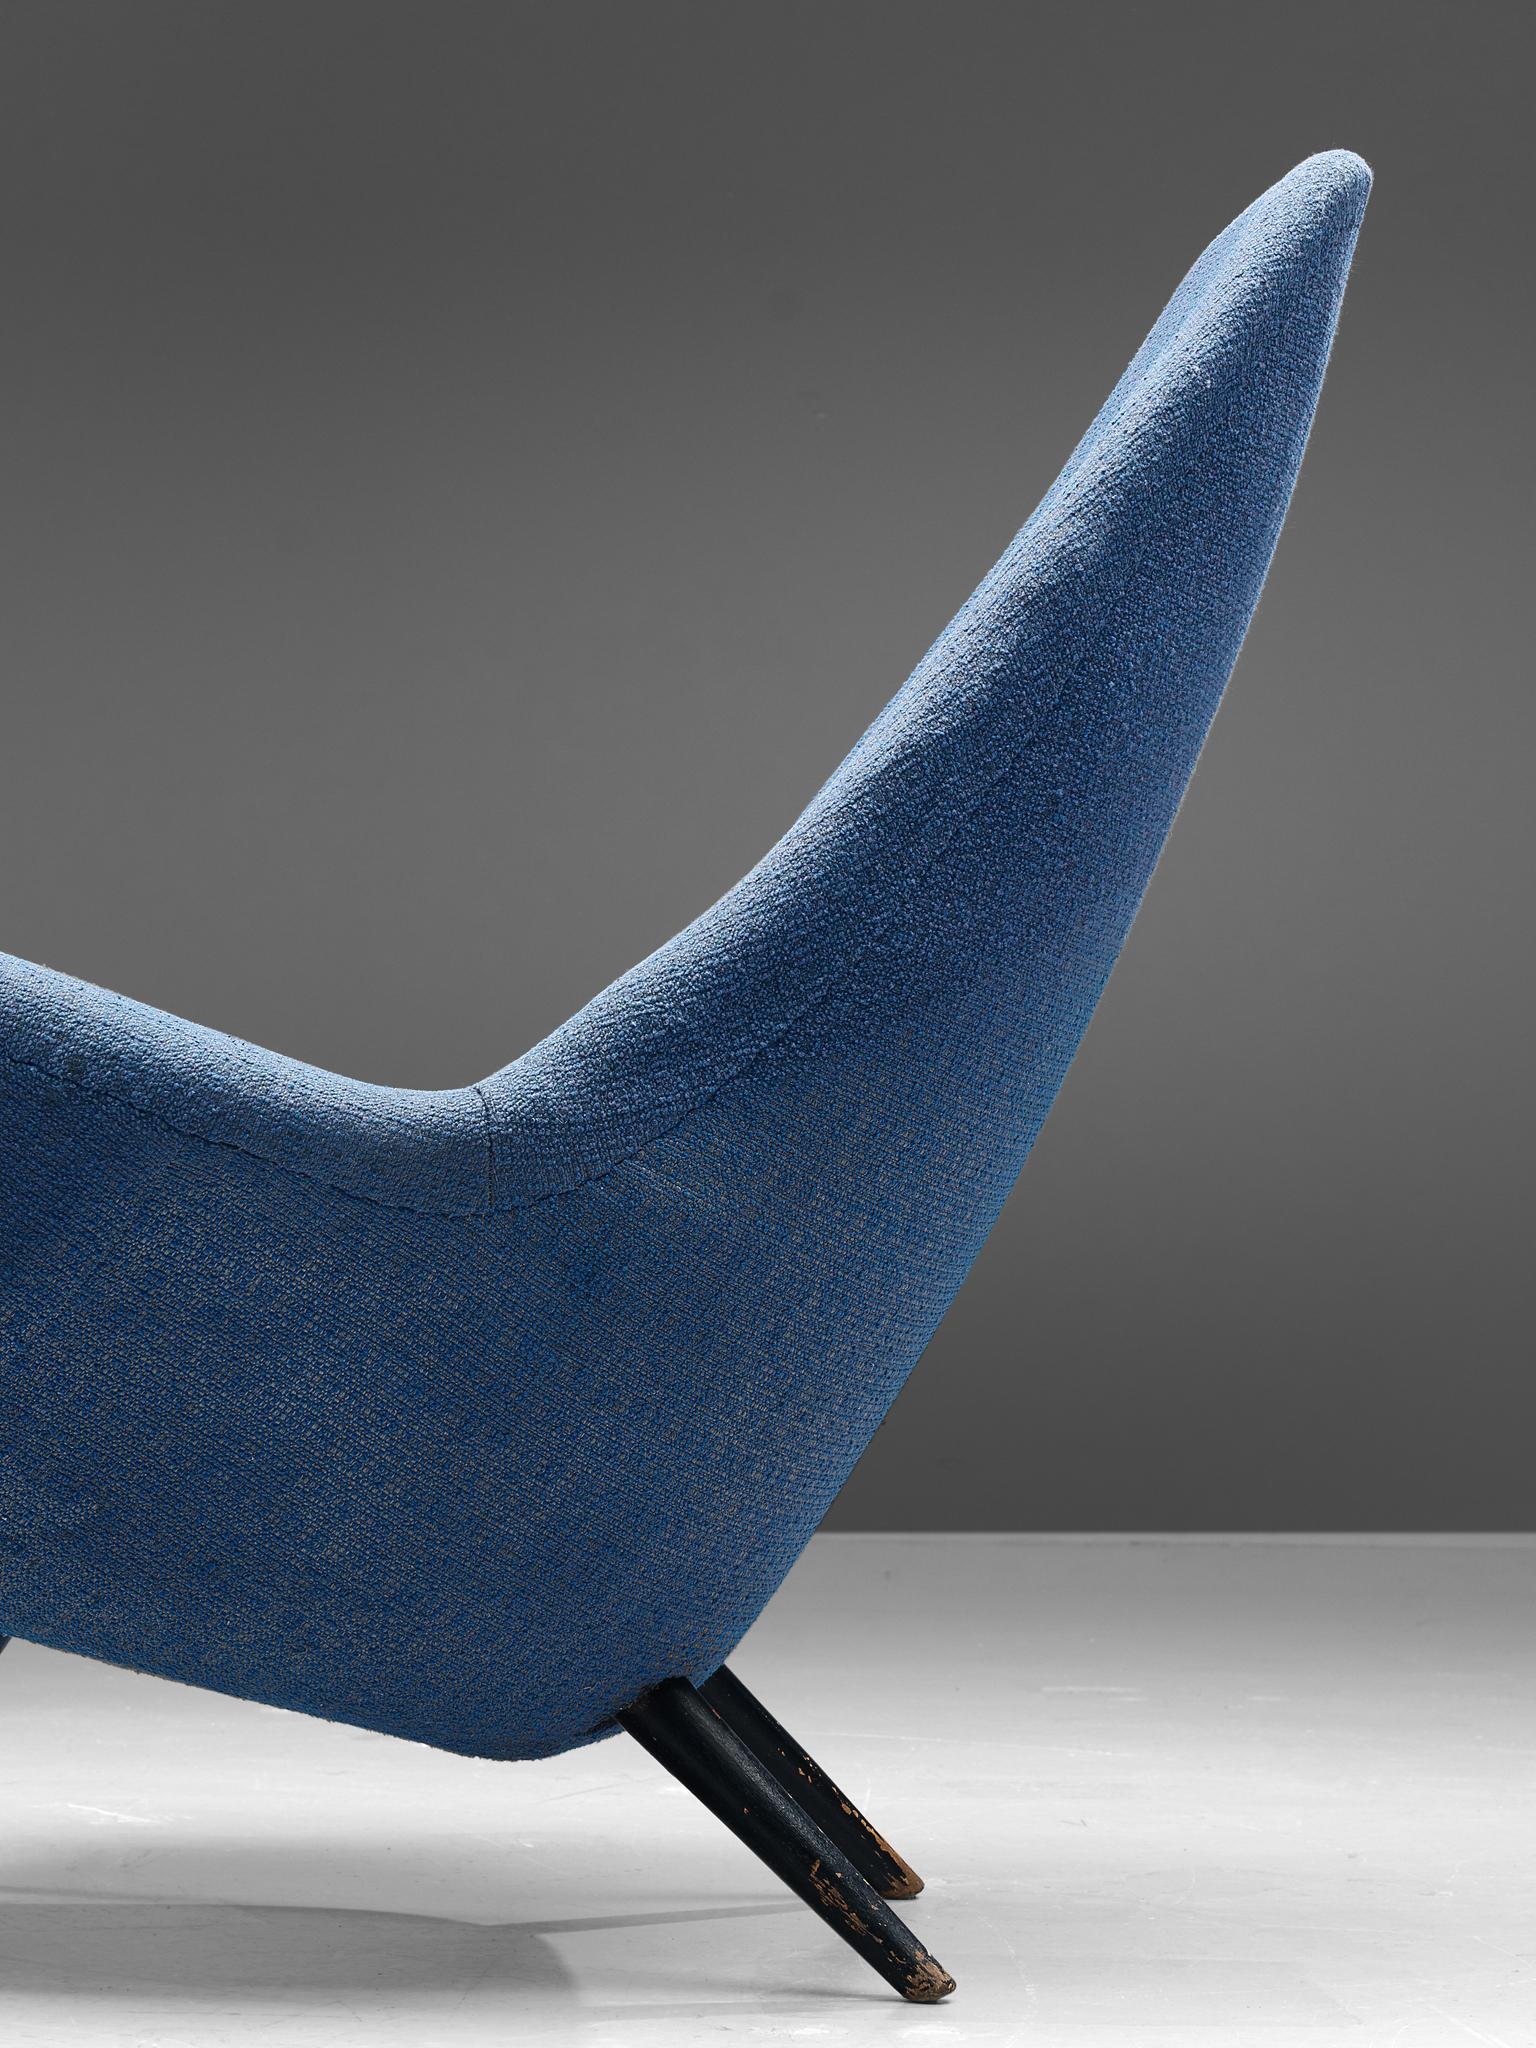 Mid-20th Century Danish Lounge Chair with Sculptural Back in Blue Upholstery